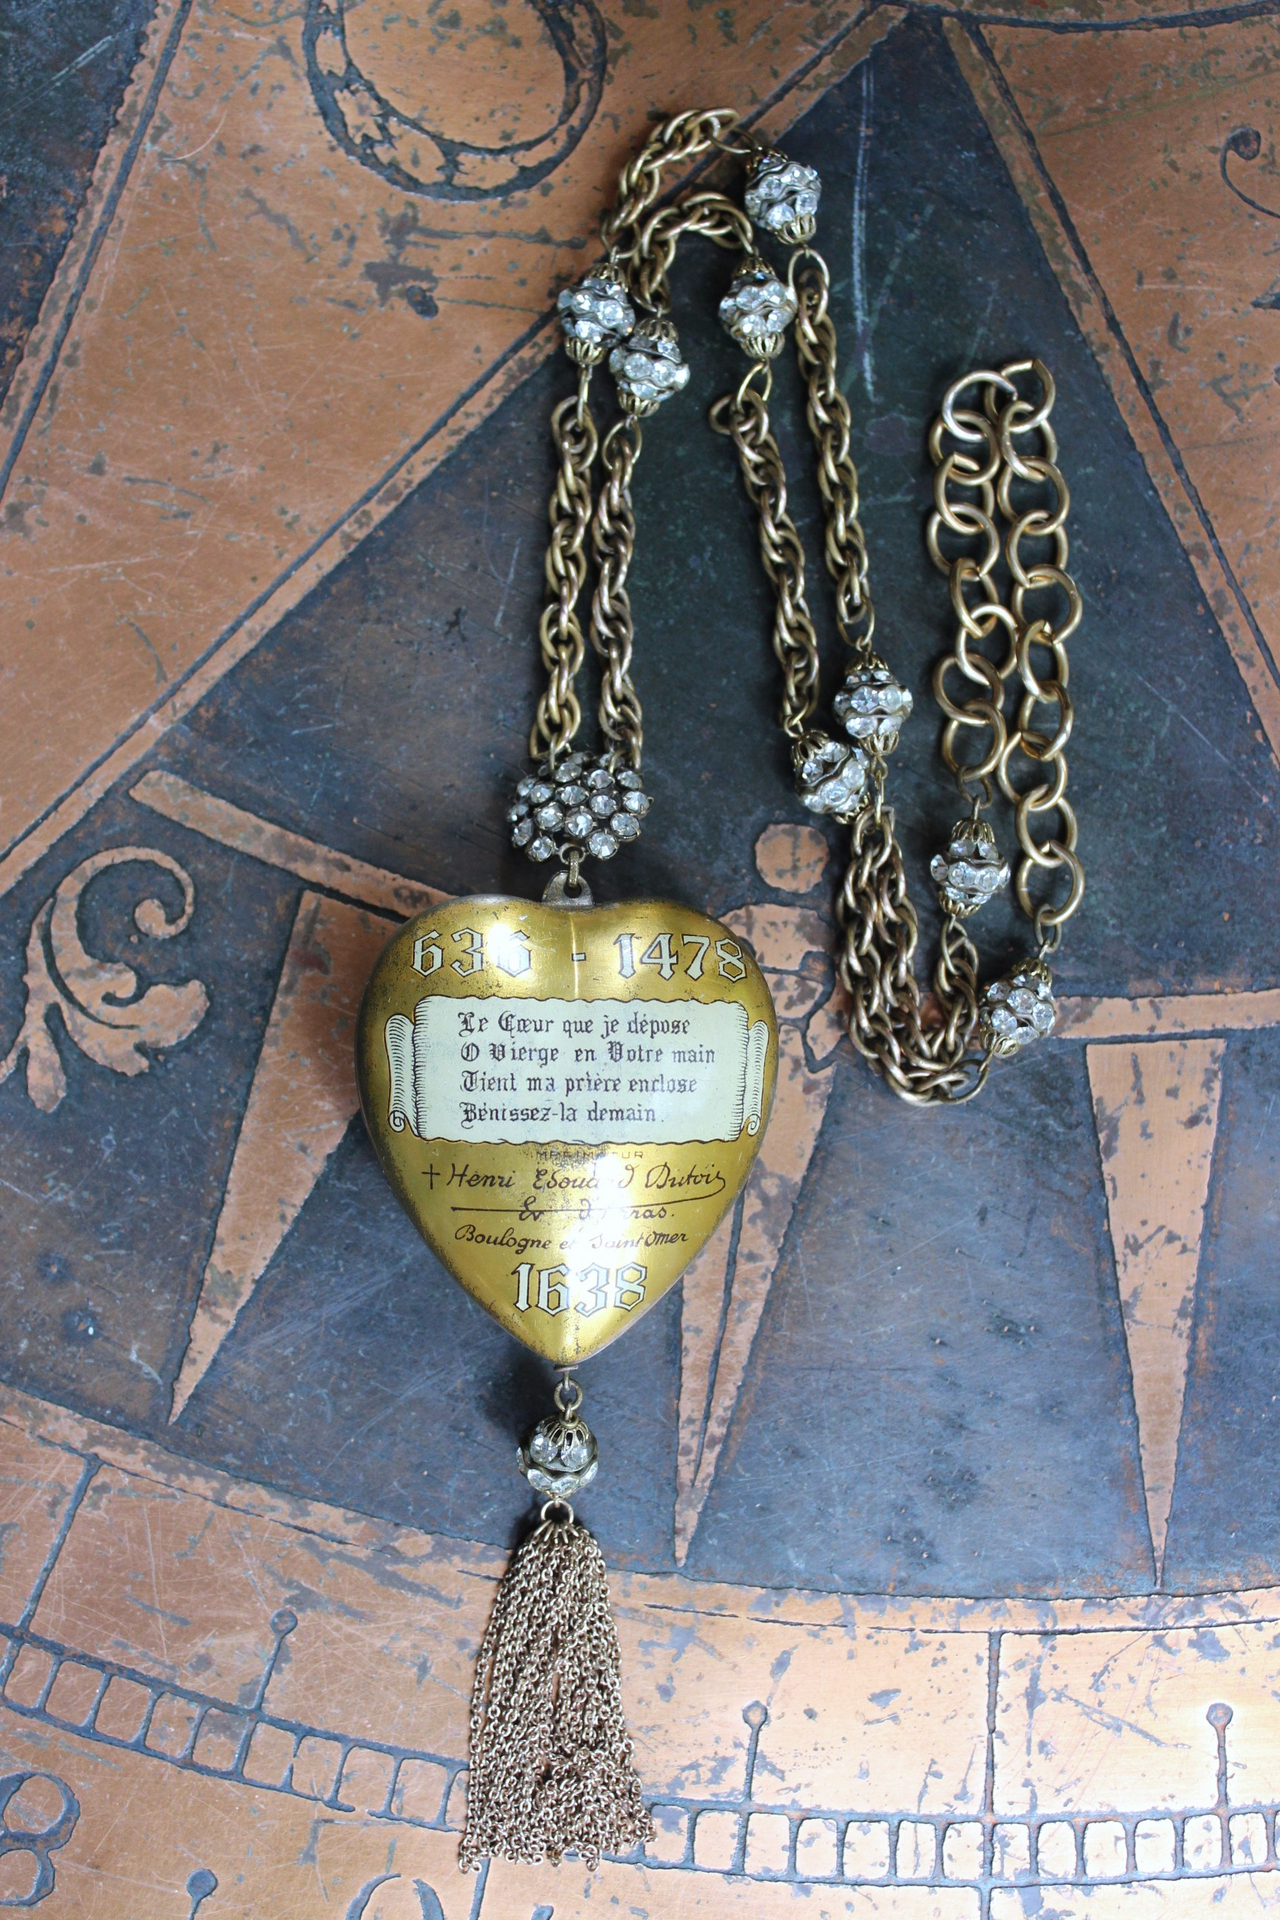 NEW! Rare 1938 French Sacred Heart Locket Necklace with 2 Antique Scapulars,Vintage Faceted Rhinestone Connectors and Chain Tassel